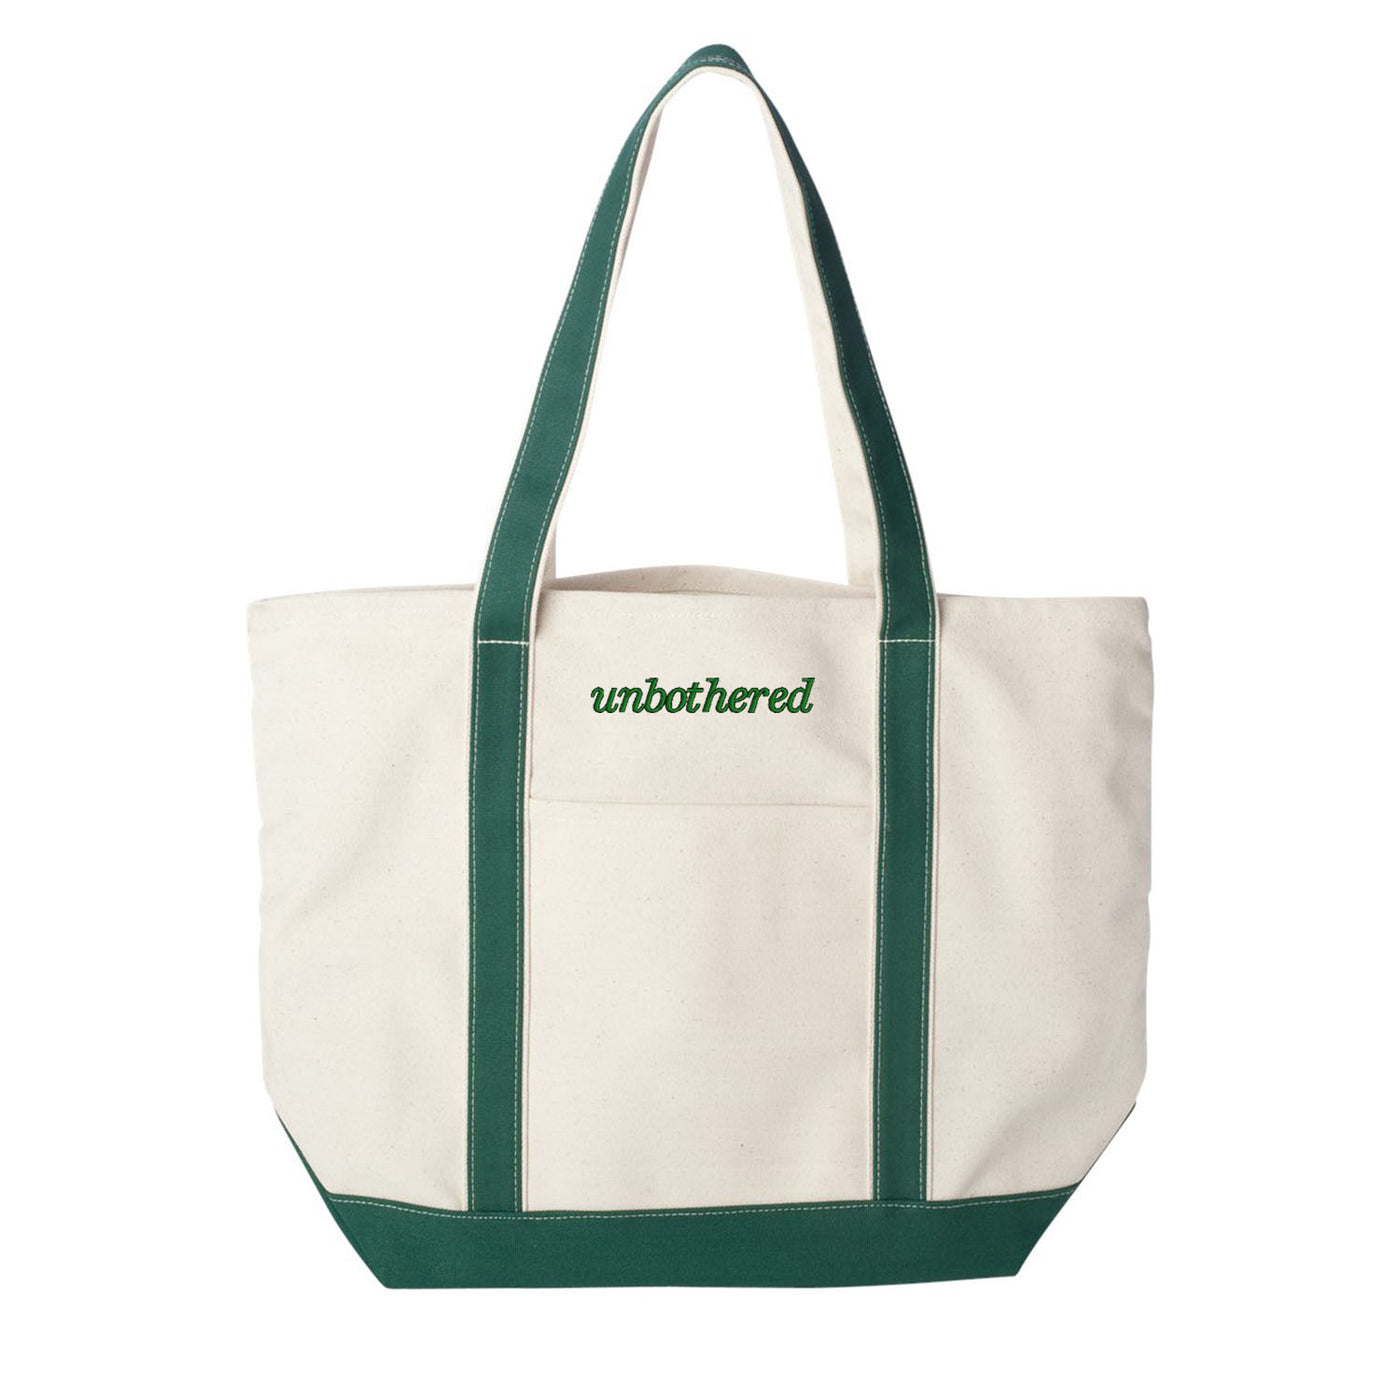 Make It Yours™ Canvas Boat Tote